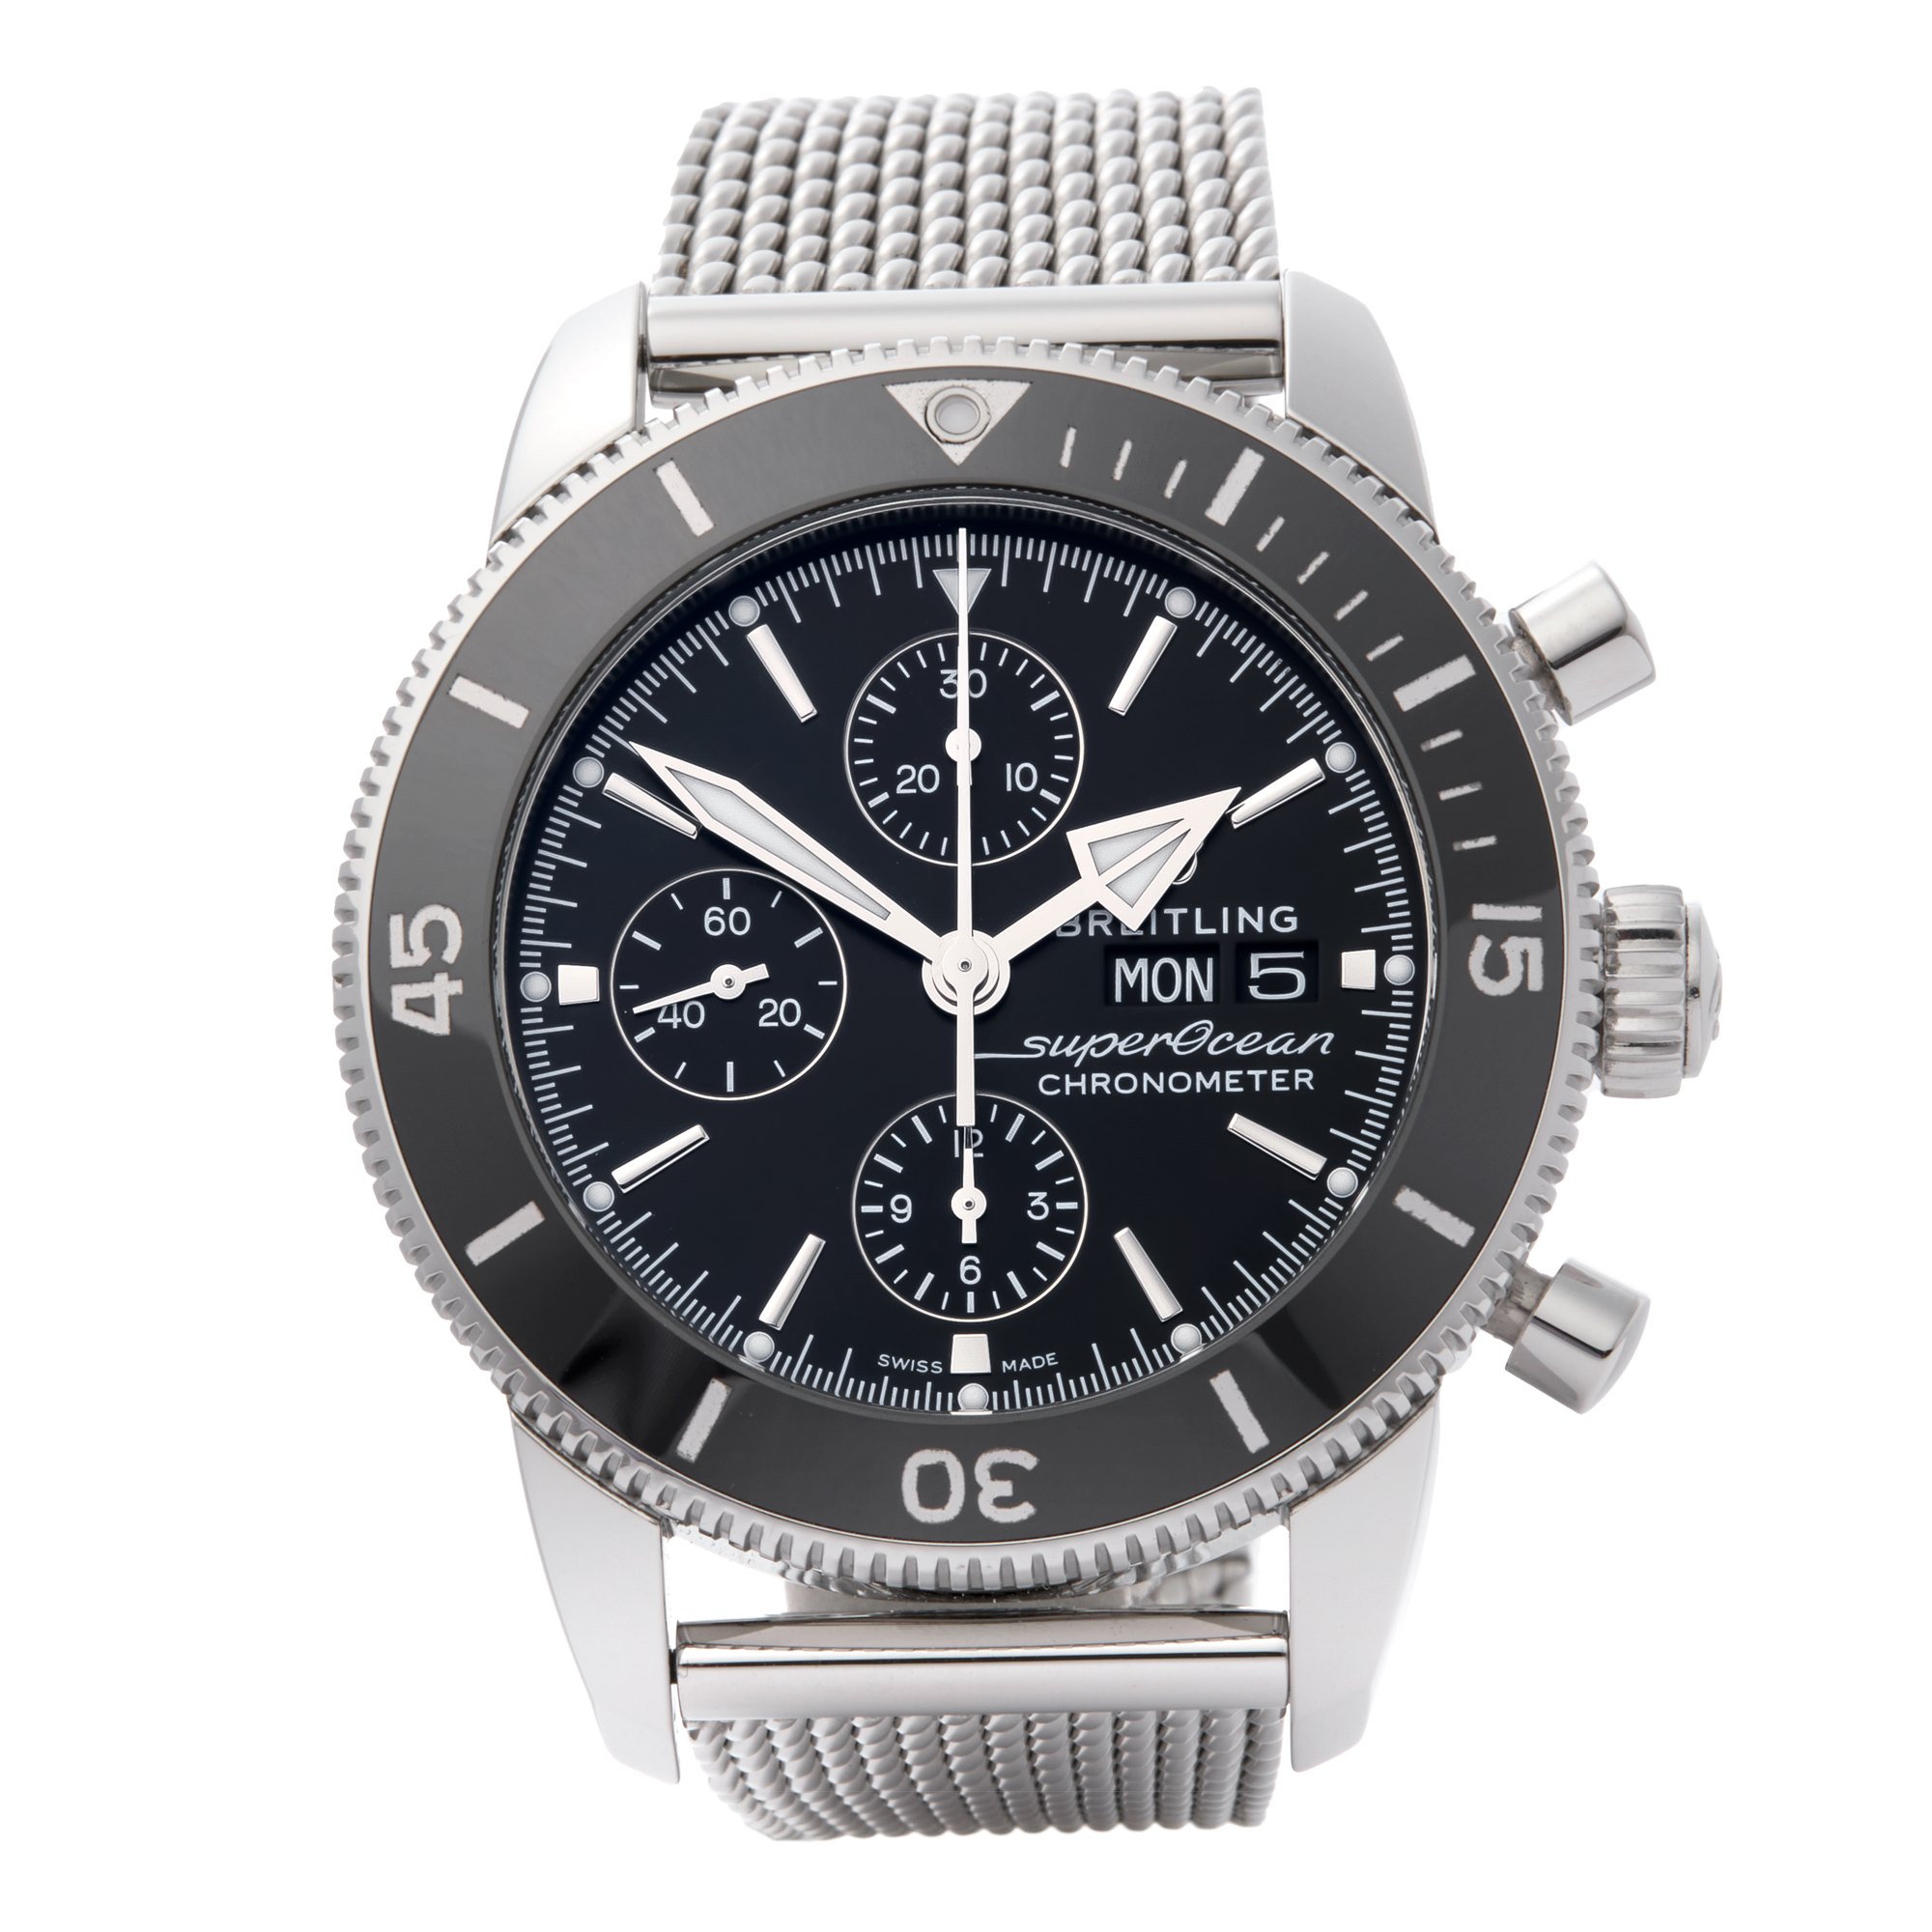 Breitling Superocean II Chronograph Roestvrij Staal A133121B1A1